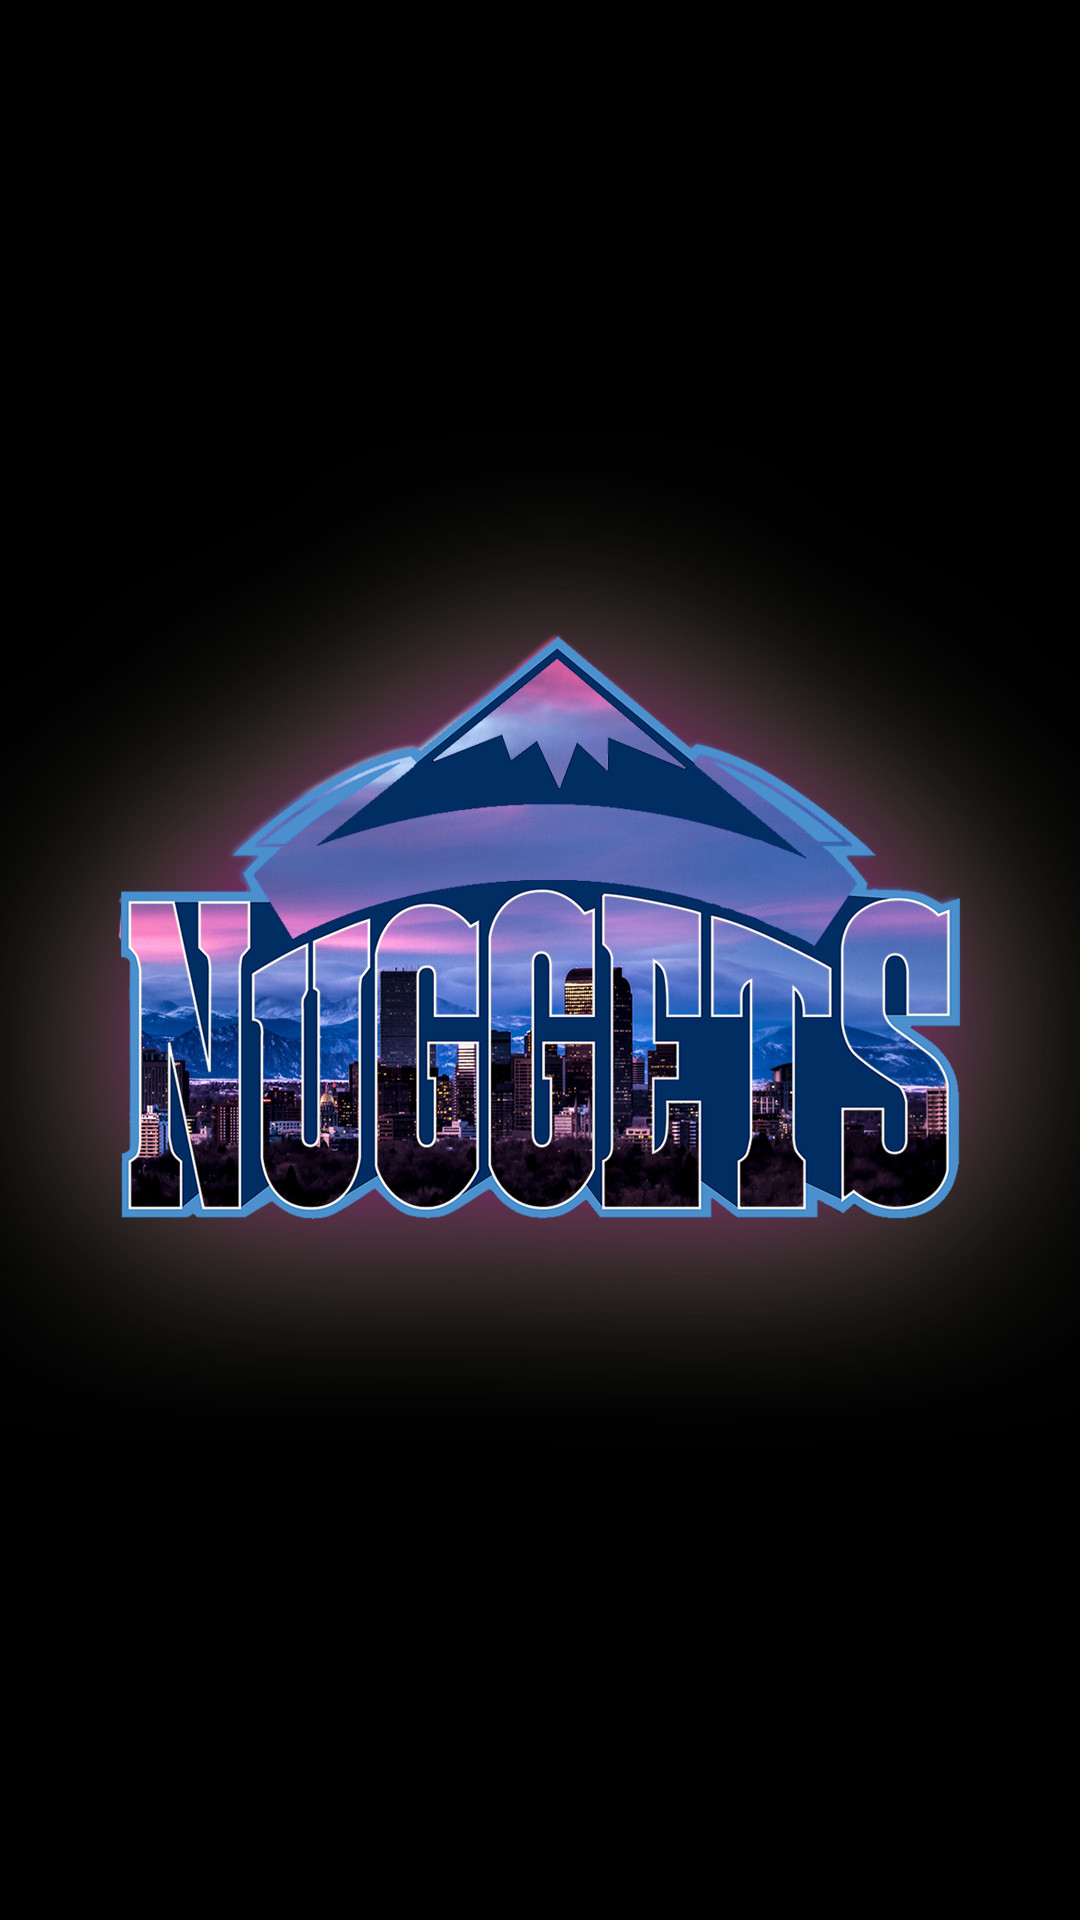 Denver nuggets wallpaper for iPhone and Android I made denvernuggets